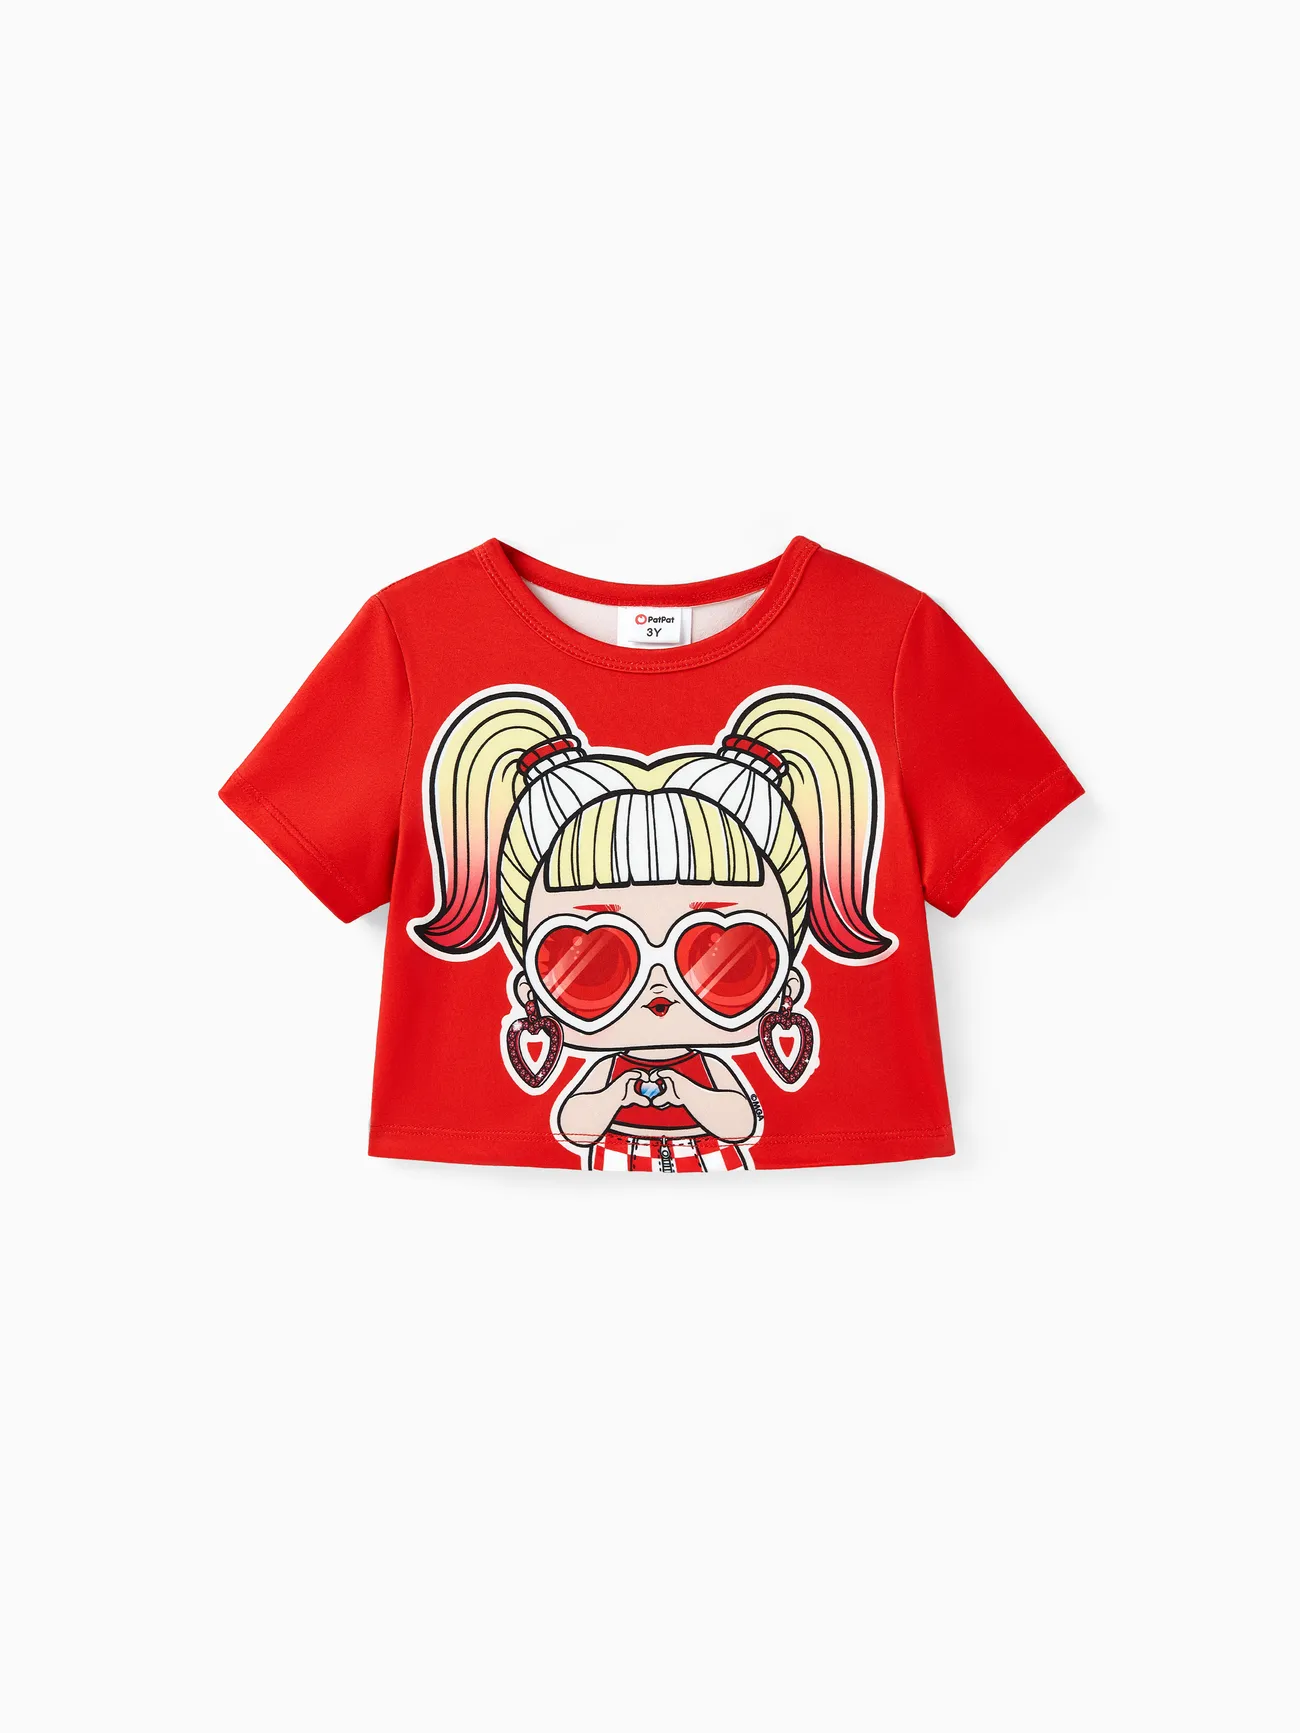 L.O.L. SURPRISE! Toddler Girl/Kid Girl Graphic Print Short-sleeve Tee and Skirt REDWHITE big image 1